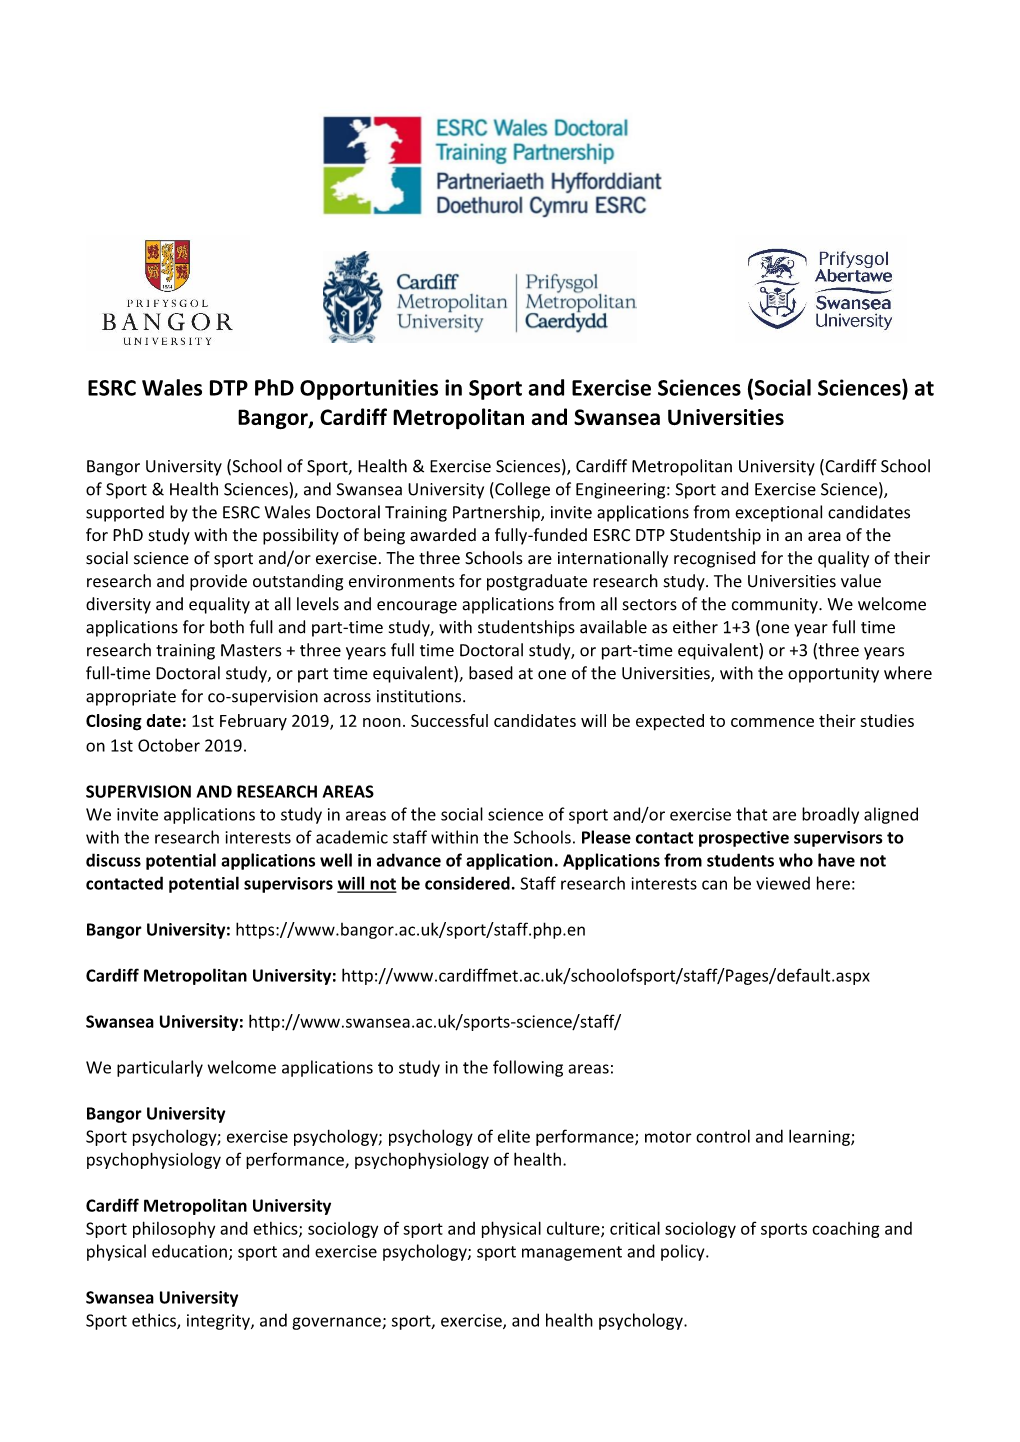 ESRC Wales DTP Phd Opportunities in Sport and Exercise Sciences (Social Sciences) at Bangor, Cardiff Metropolitan and Swansea Universities